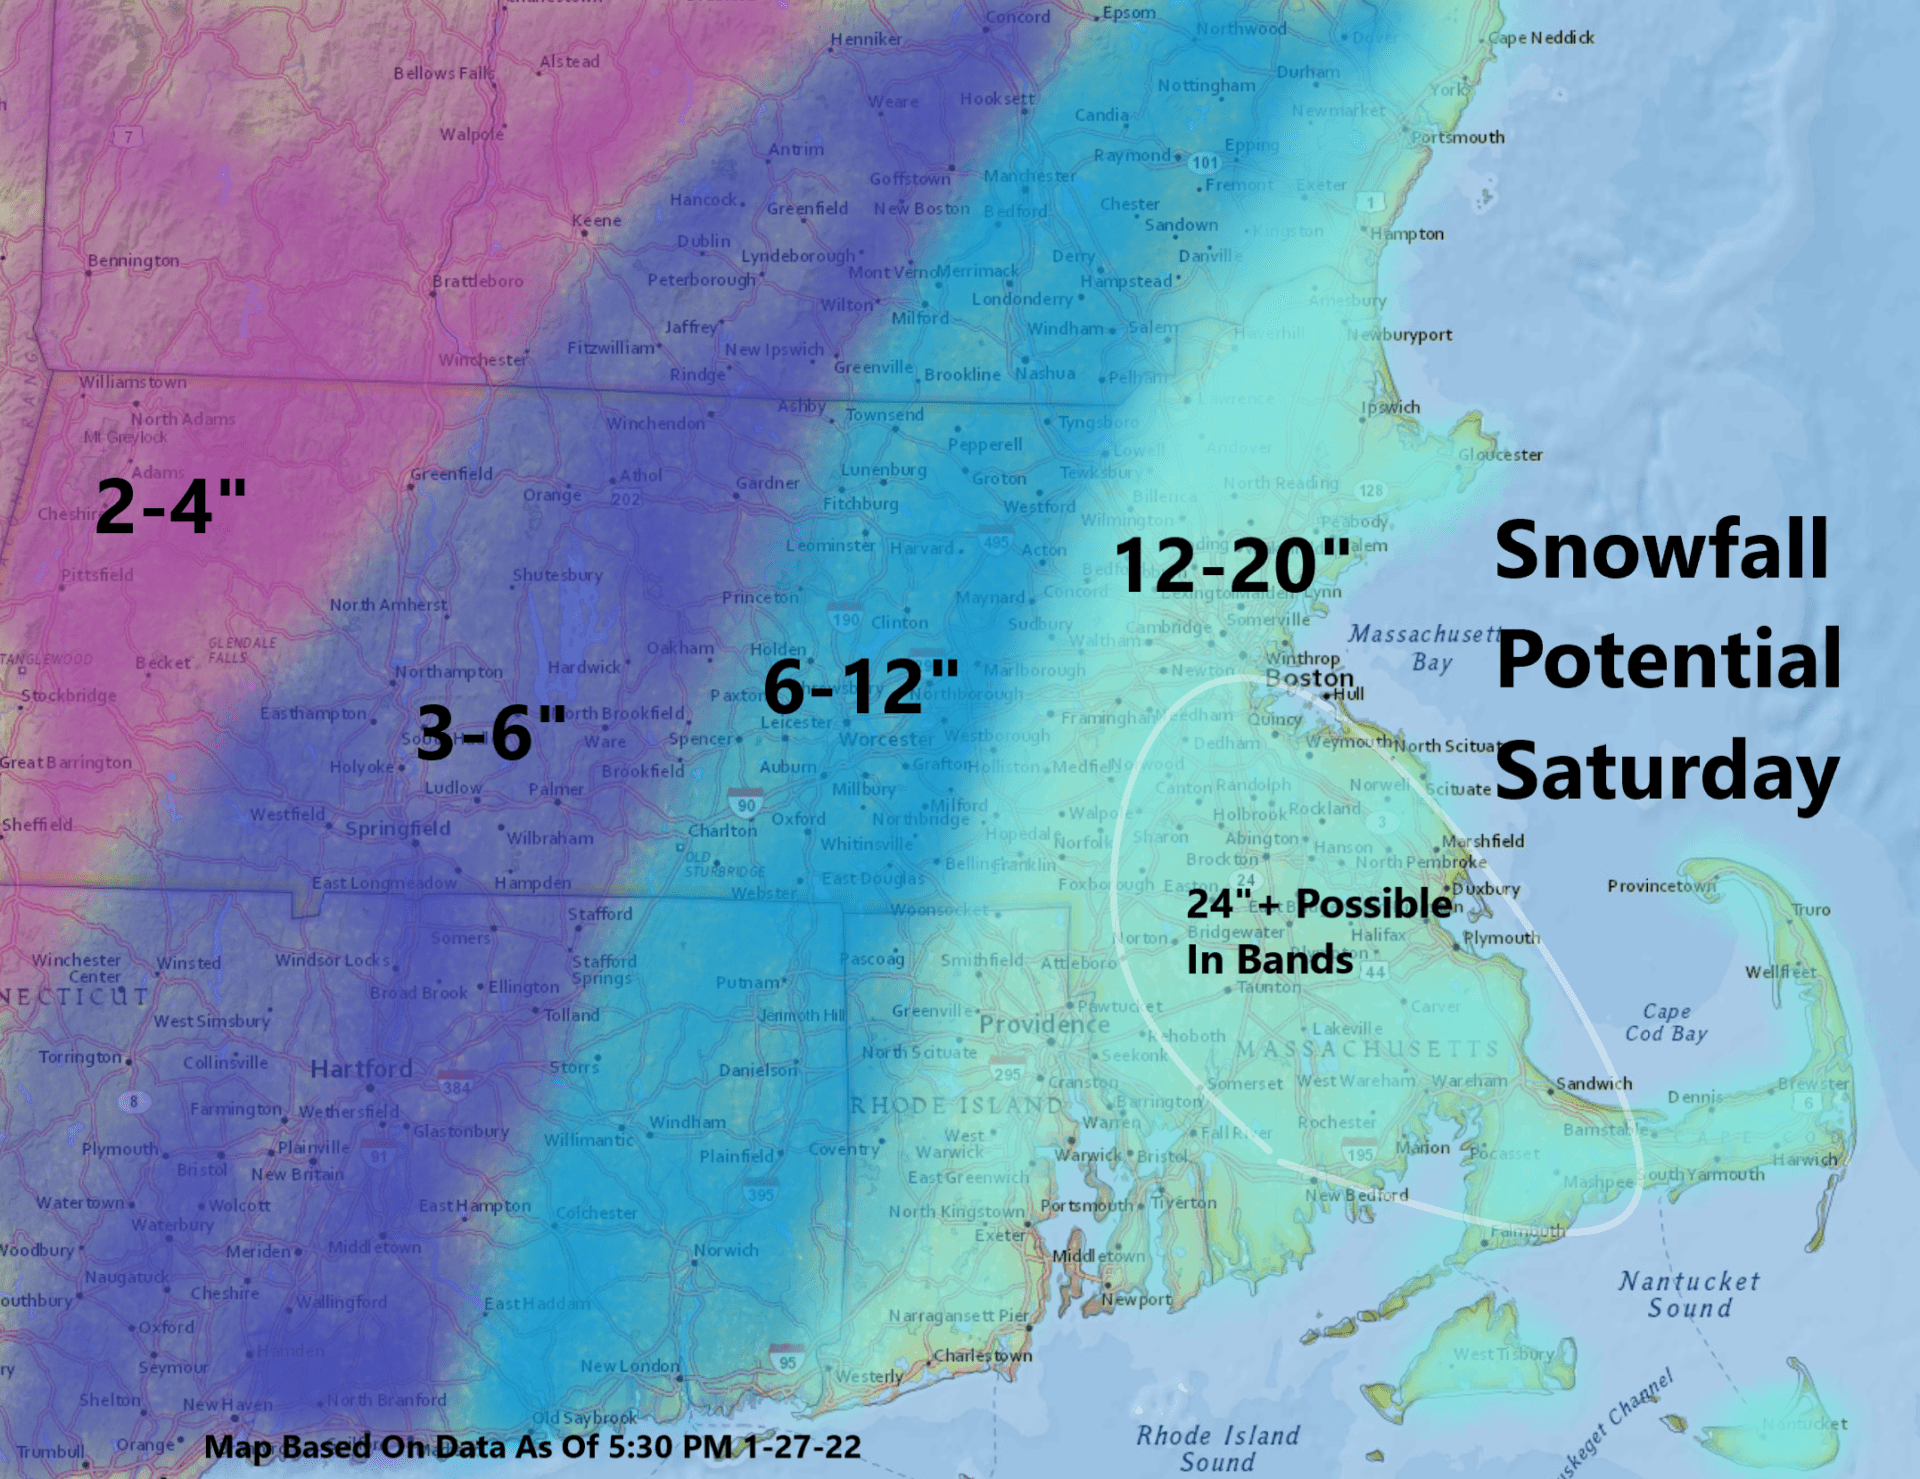 Heavy snow is expected over much of eastern Massachusetts with lighter amounts further west. (Courtesy NOAA/Illustration by Dave Epstein)